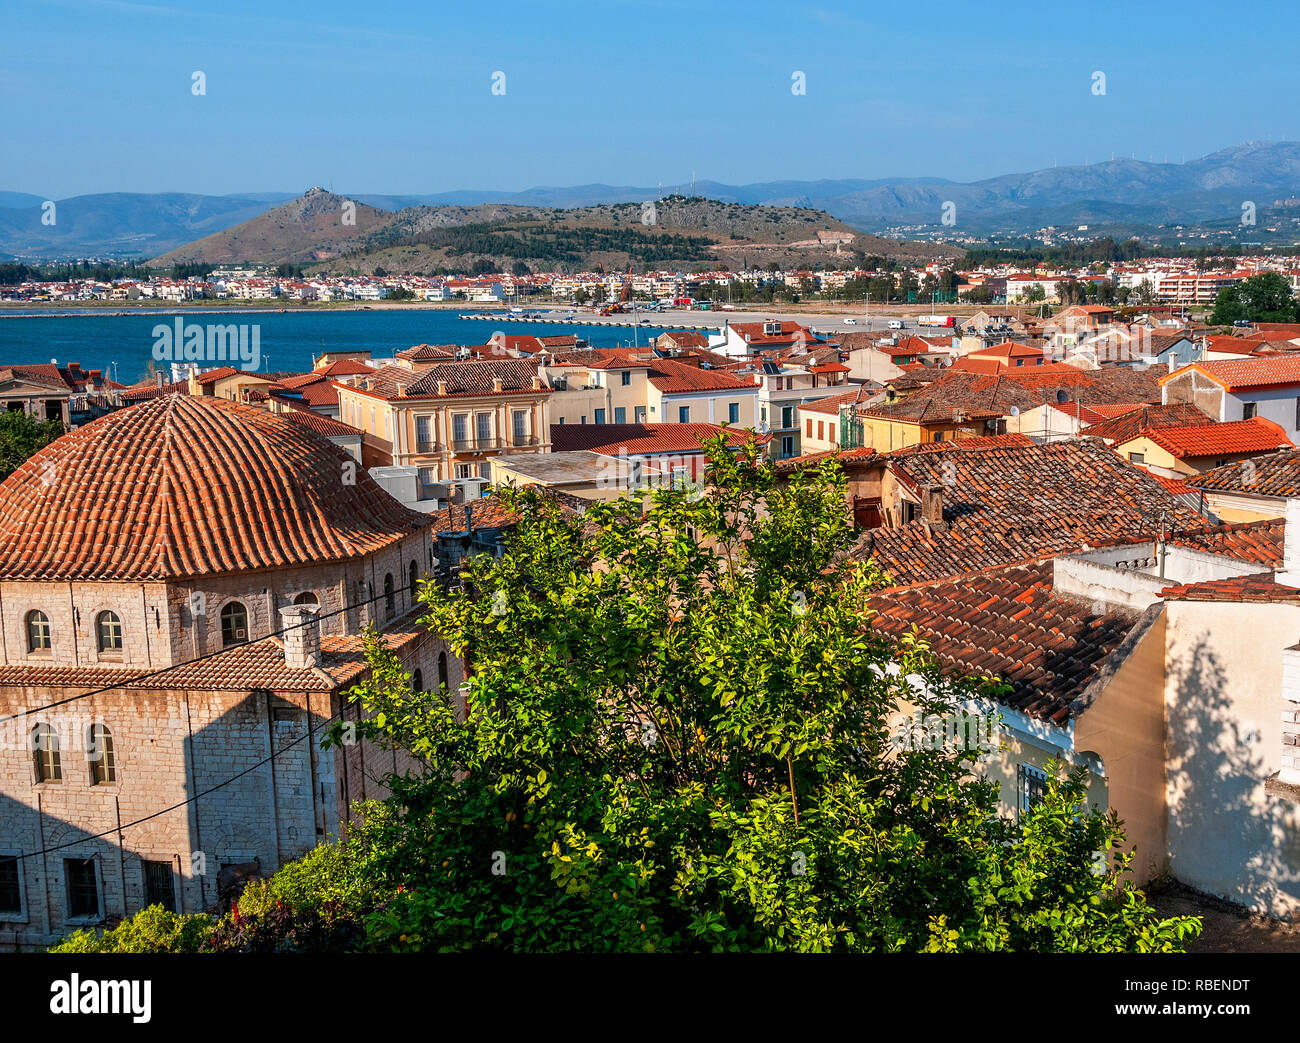 High aspect view over the rooftops of the town of Nafplion or Nafplio on the Argolic Gulf, Peloponnese, Greece Stock Photo